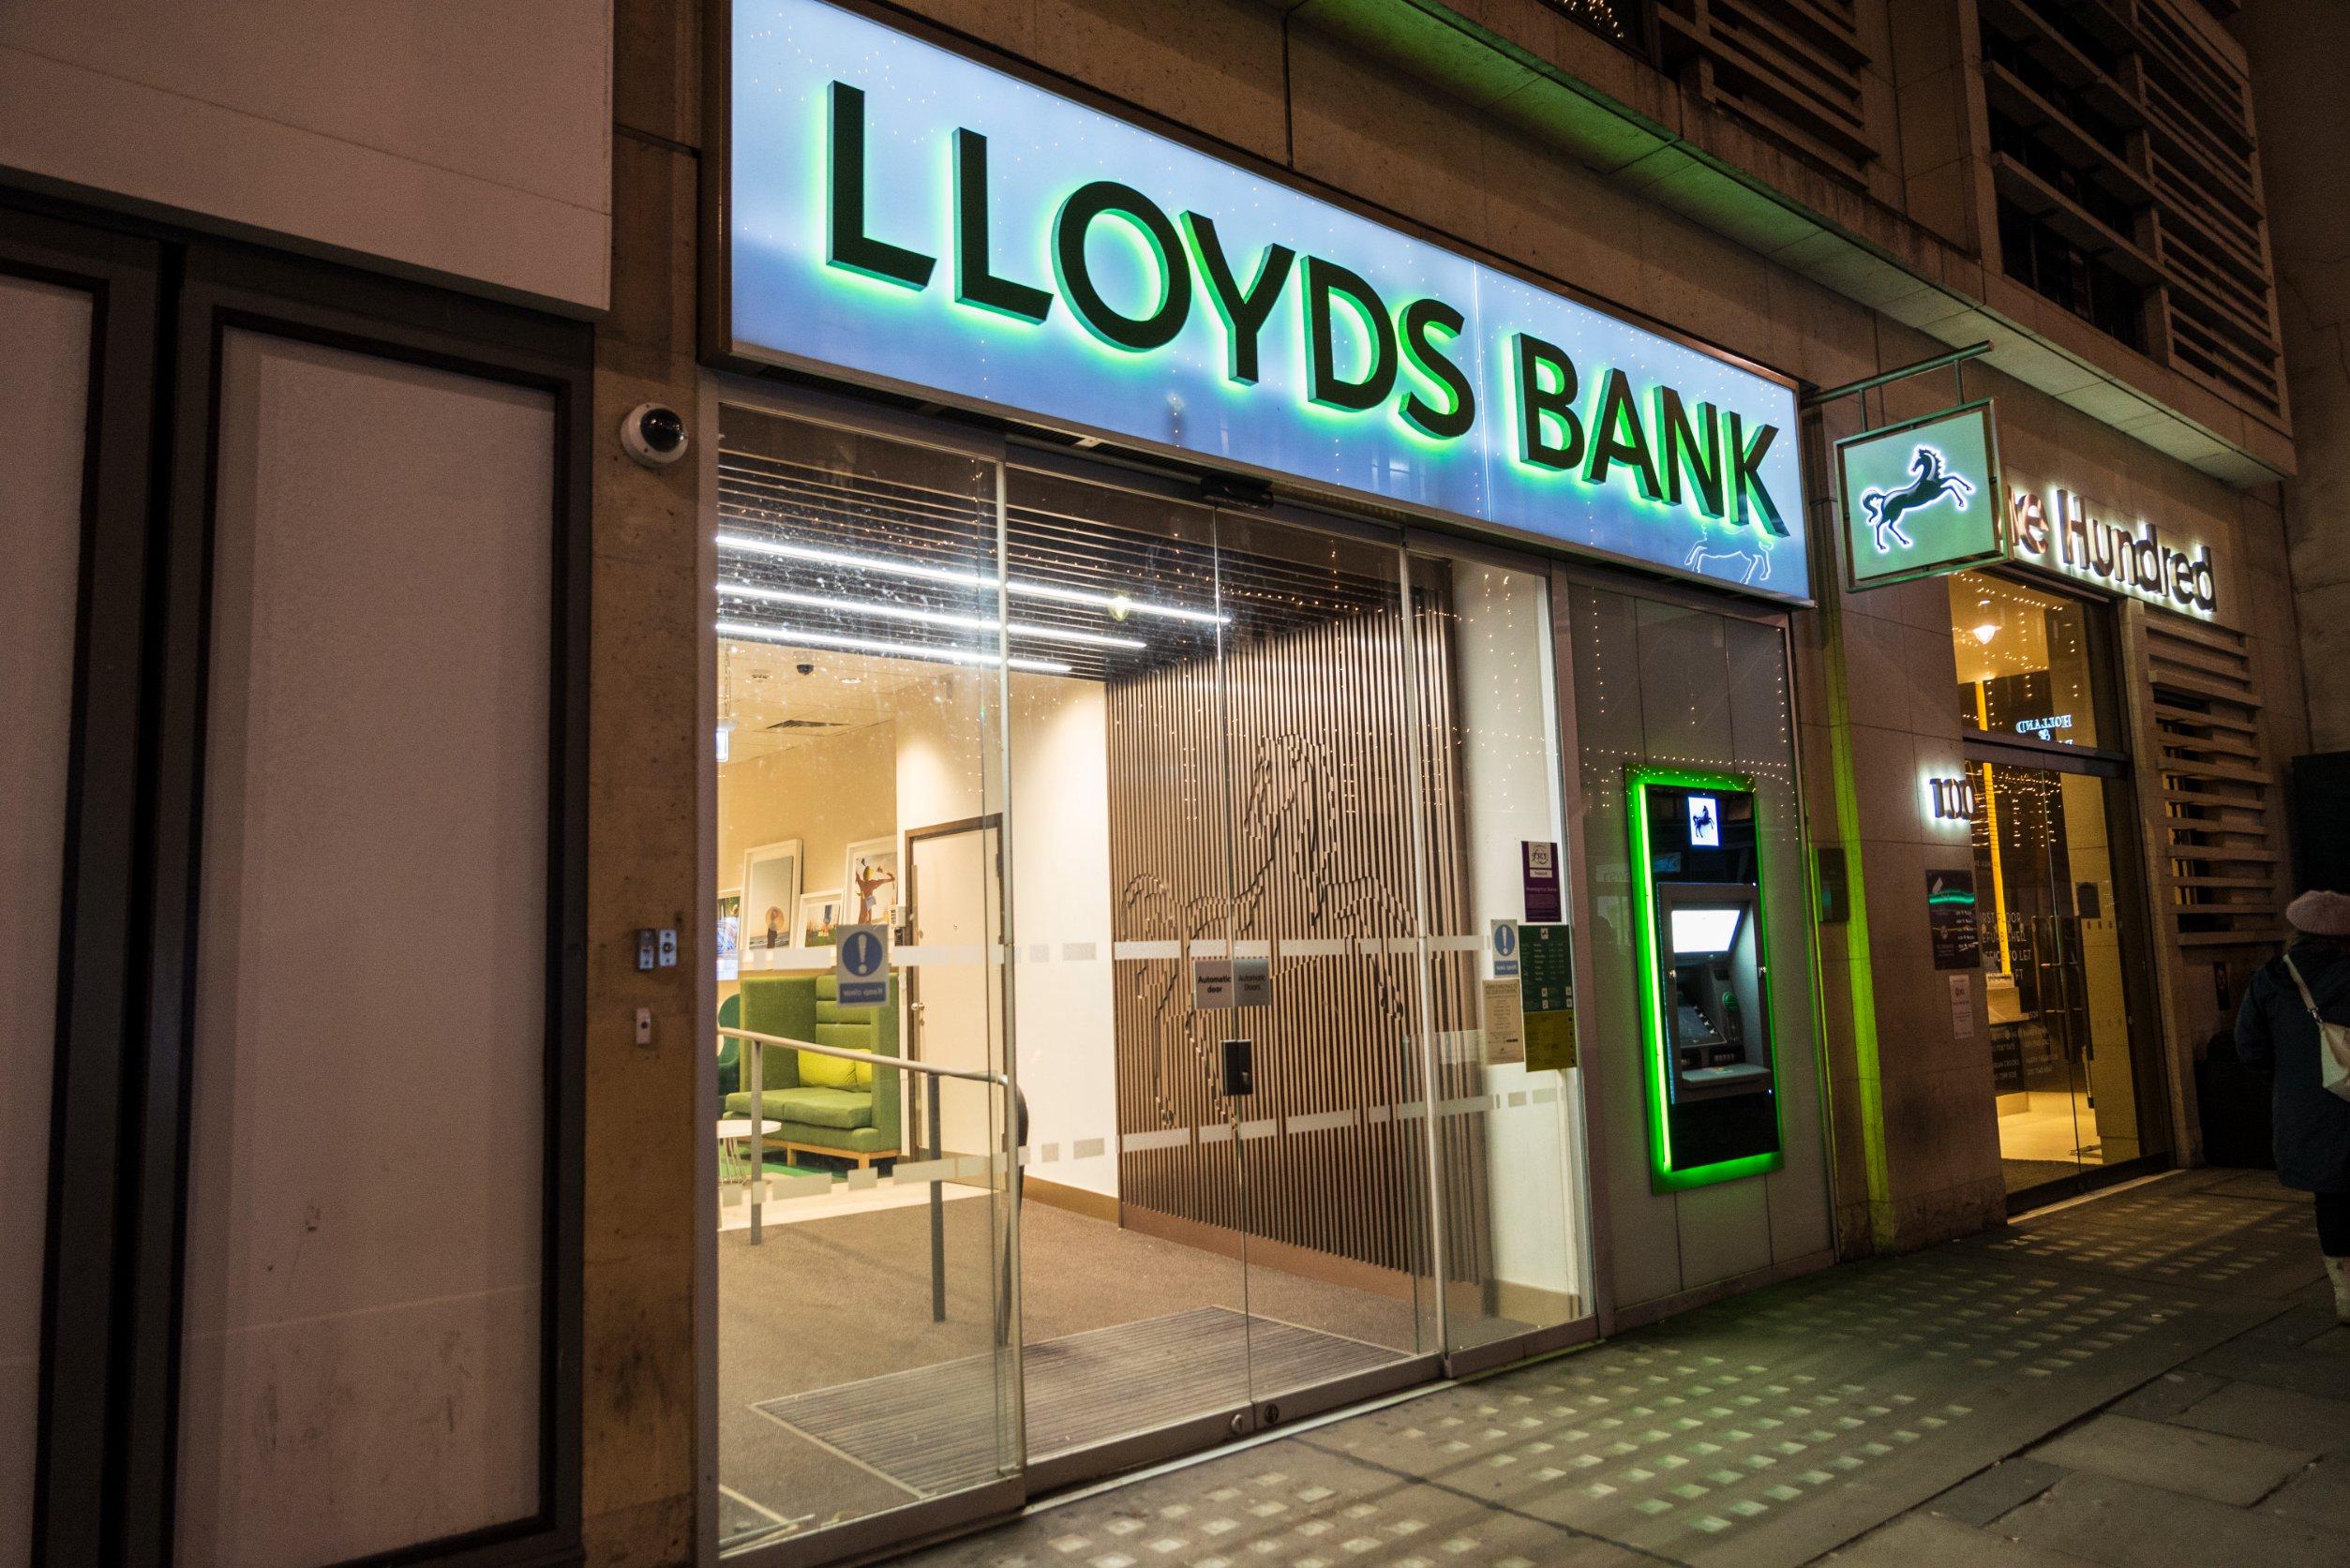 Lloyds Share Price: Bears are in Control Ahead of US Debt Ceiling Vote